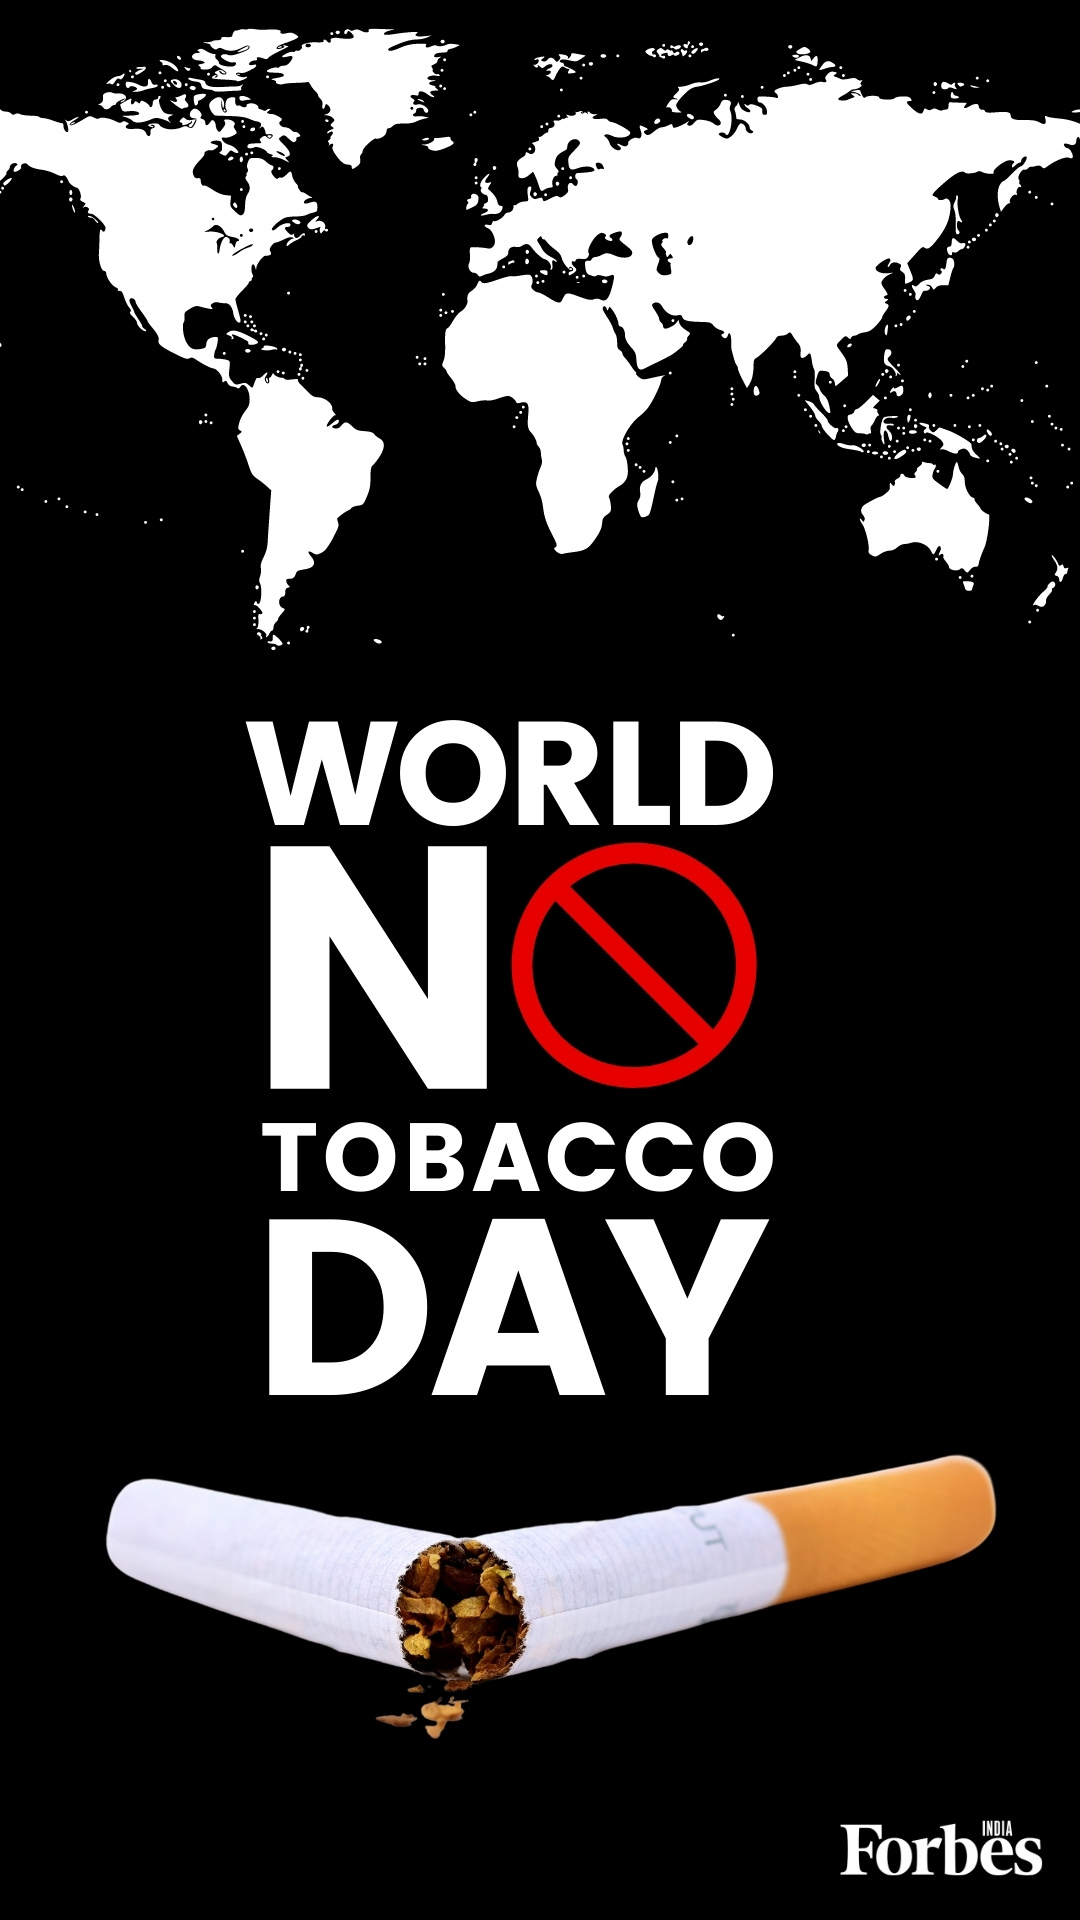 World No Tobacco Day: Tobacco kills over 8 million people every year